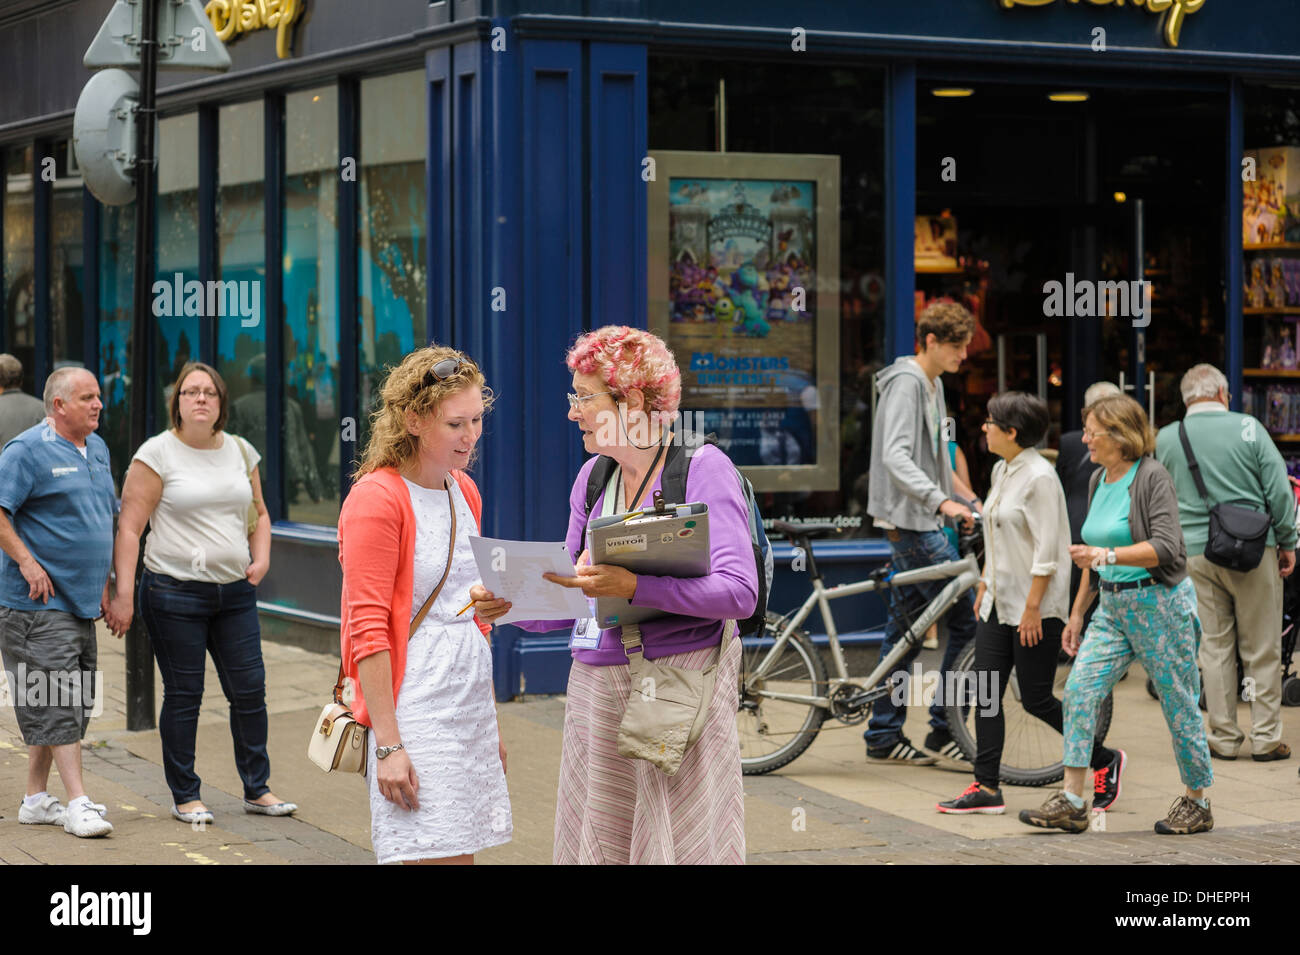 A middle-aged woman with a clipboard doing a survey on another adult woman in a UK city centre. Stock Photo